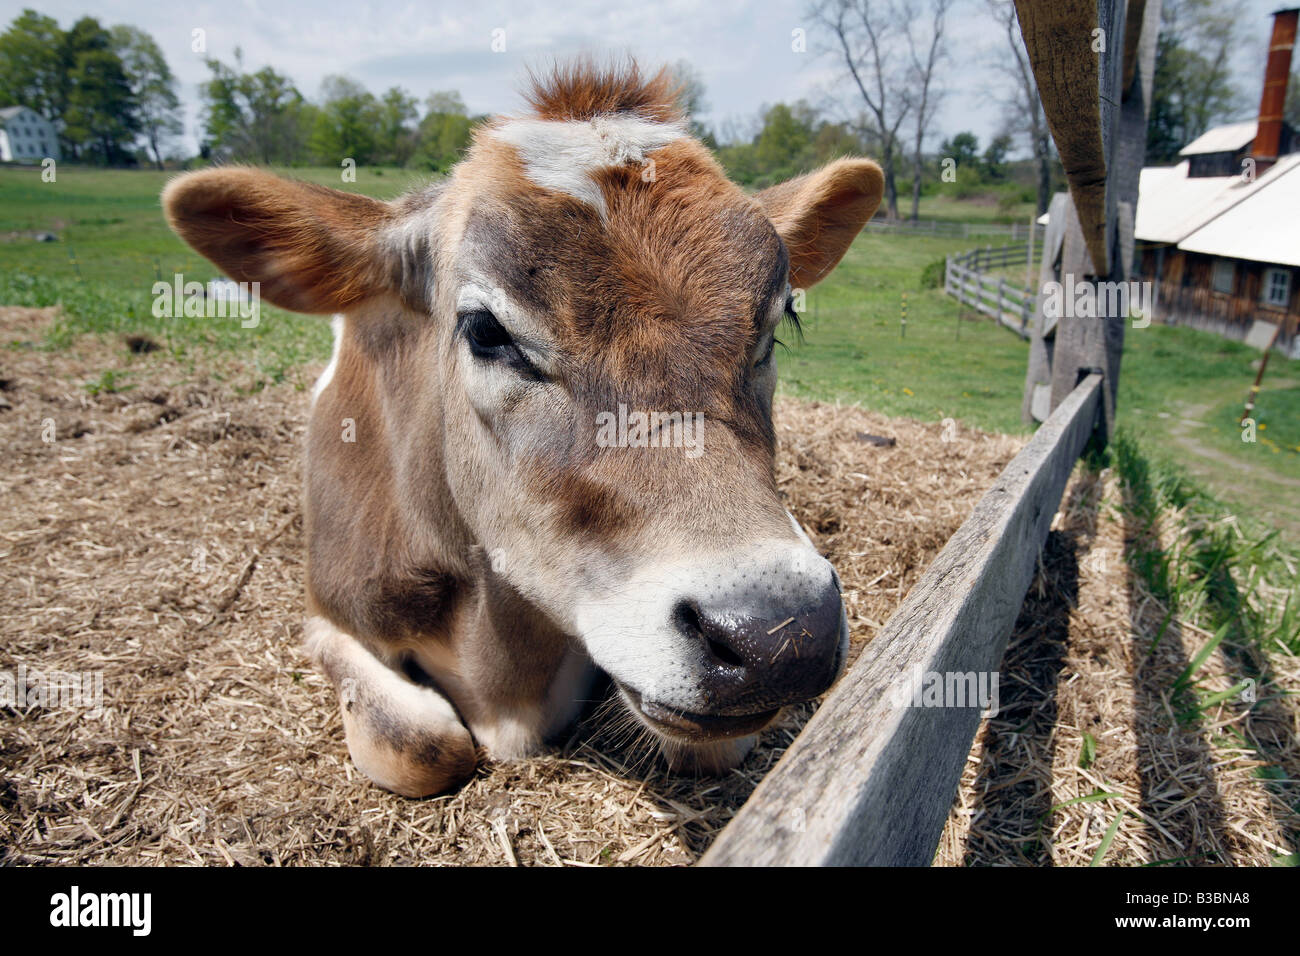 Dairy cow fence enclosure Stock Photo